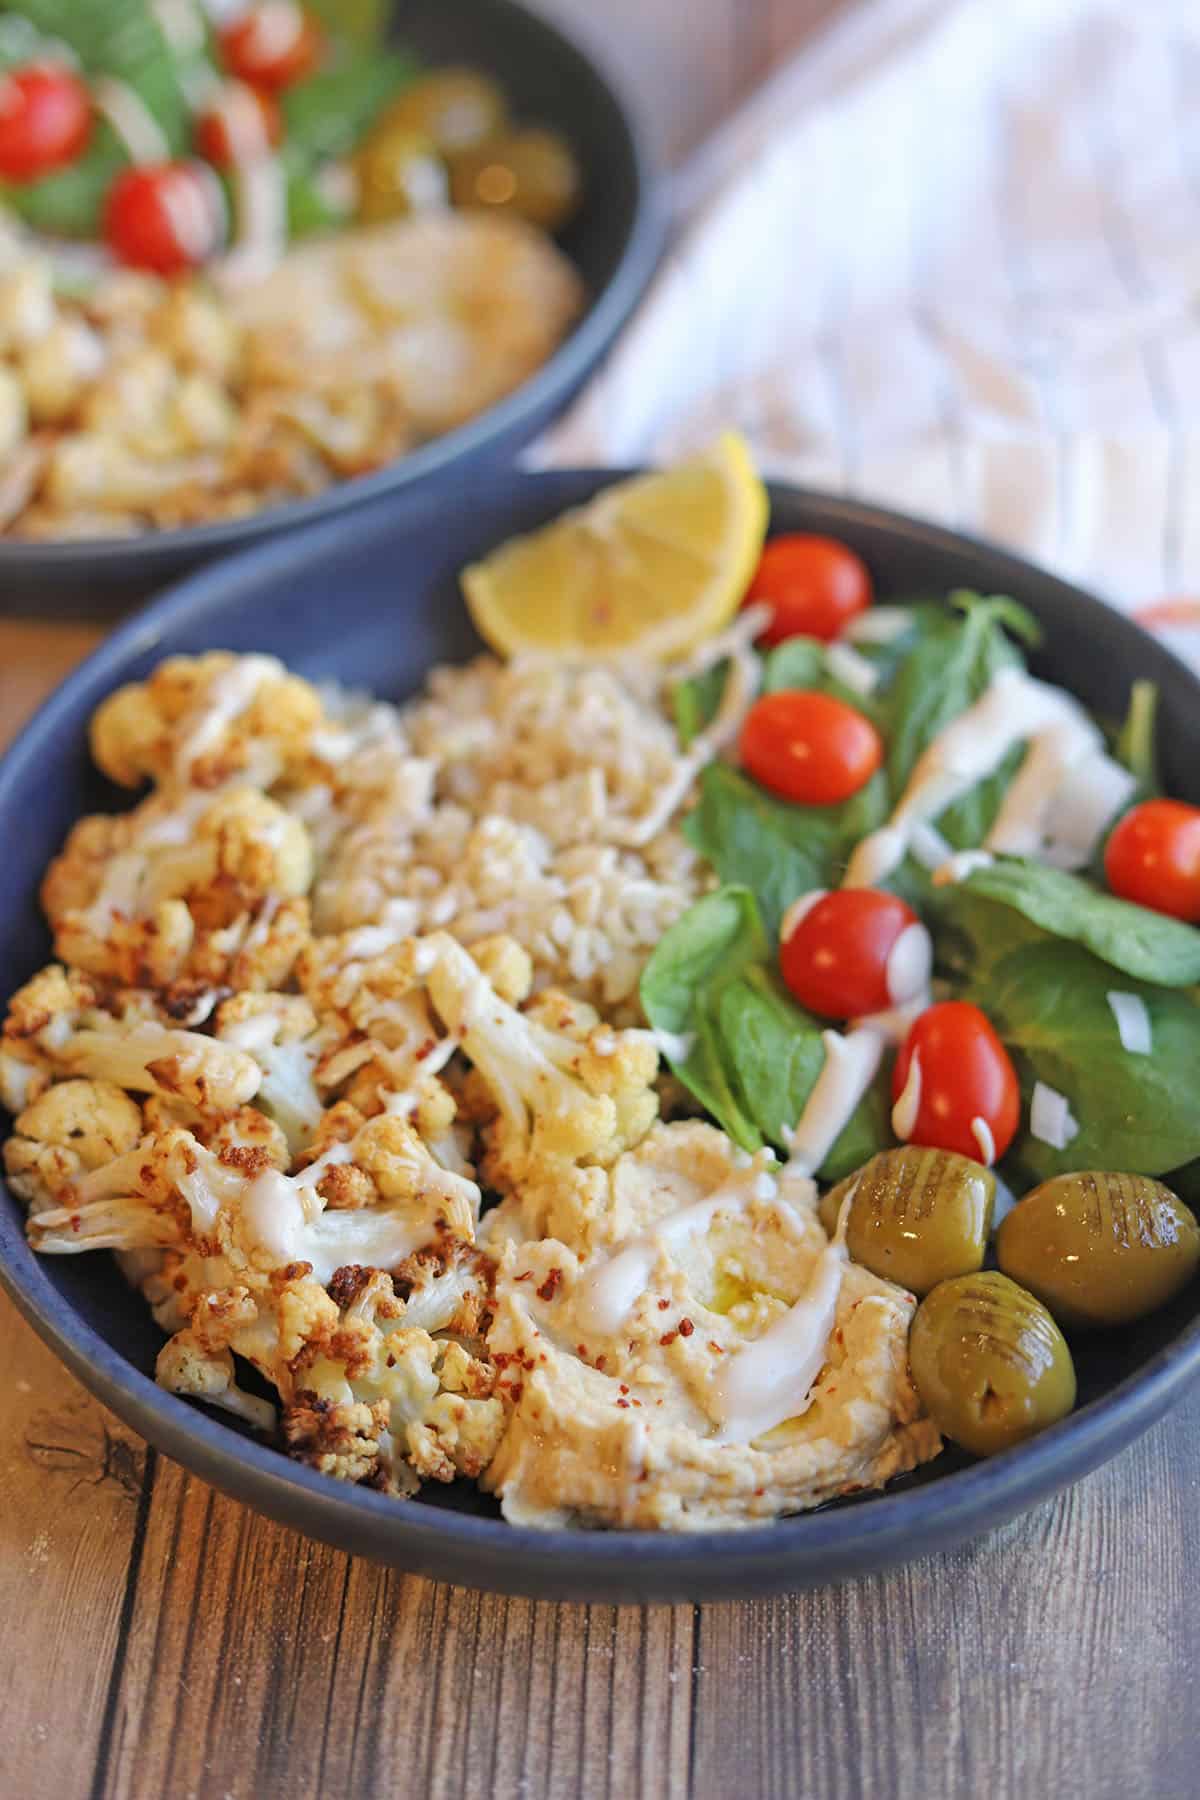 Hummus bowl with roasted cauliflower and spinach salad.